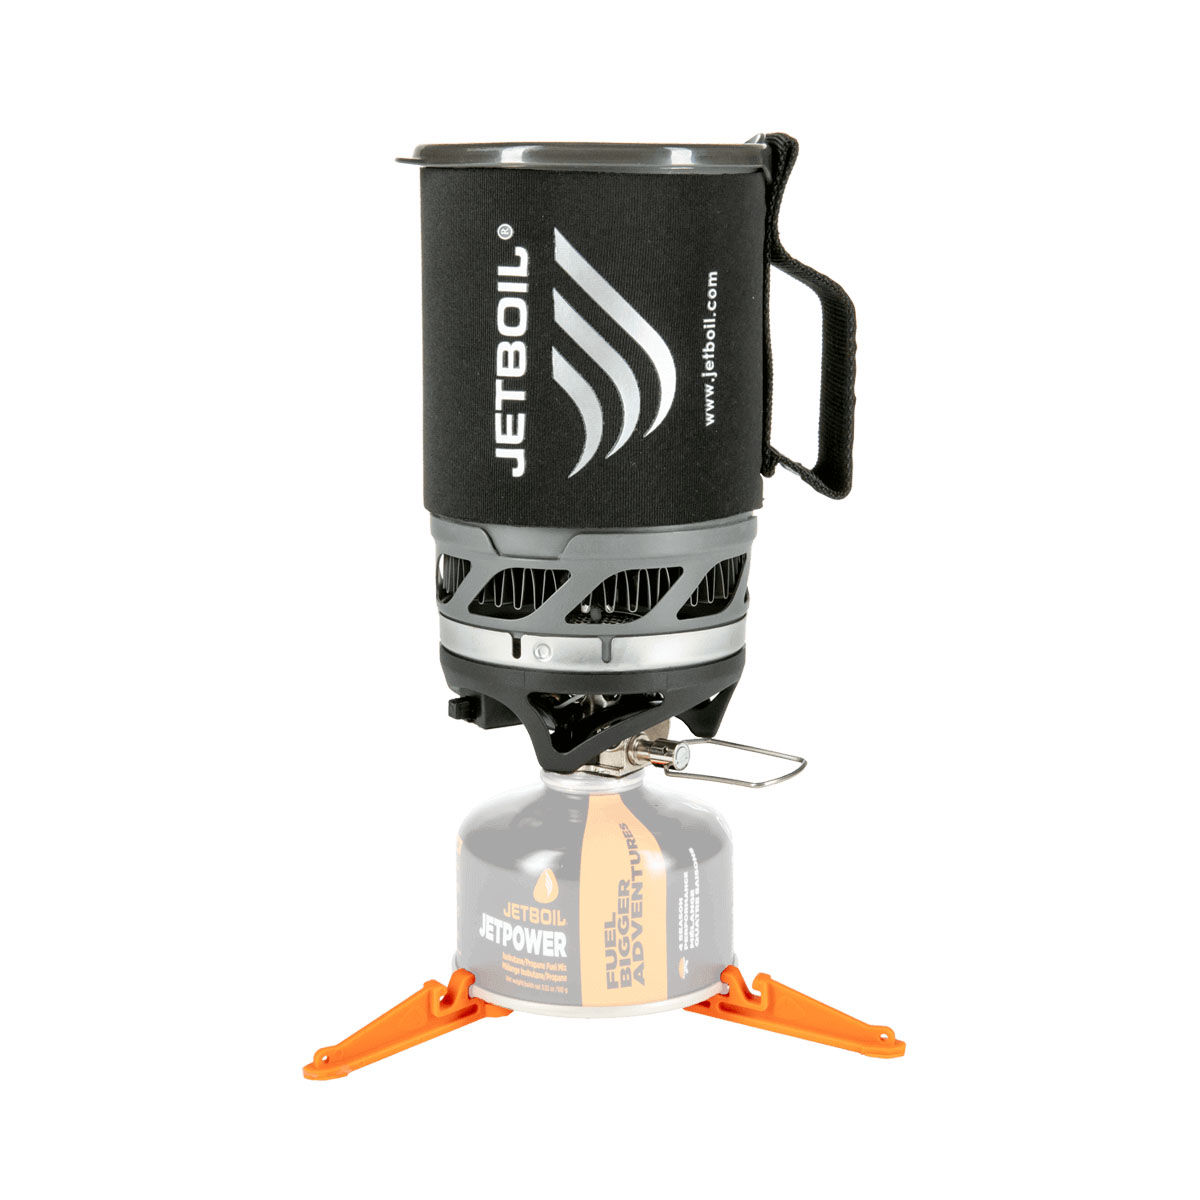 Jetboil MicroMo 1L gas-regulated cooking system